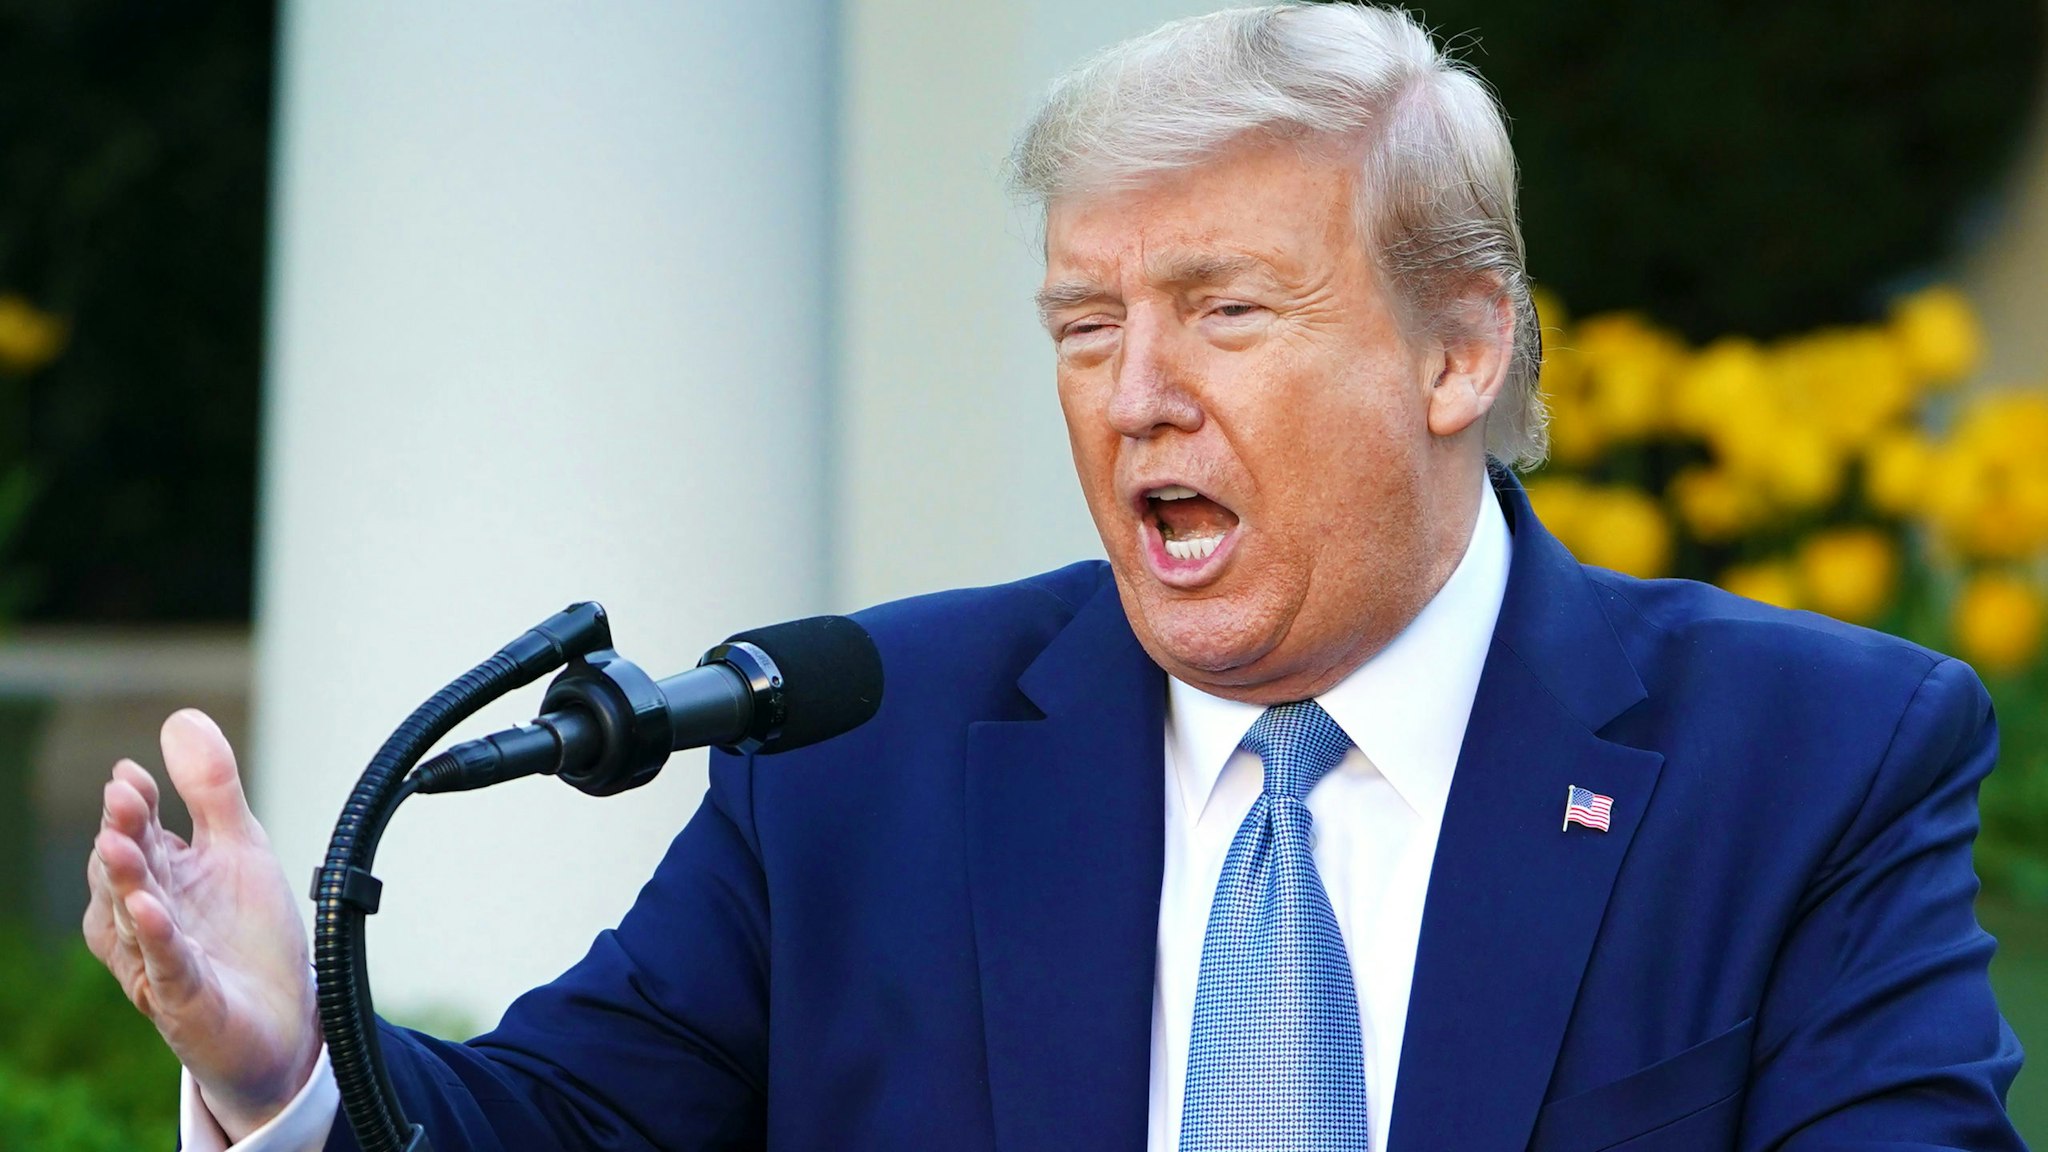 US President Donald Trump speaks during the daily briefing on the novel coronavirus, COVID-19, at the Rose Garden of the White House on April 15, 2020, in Washington, DC.